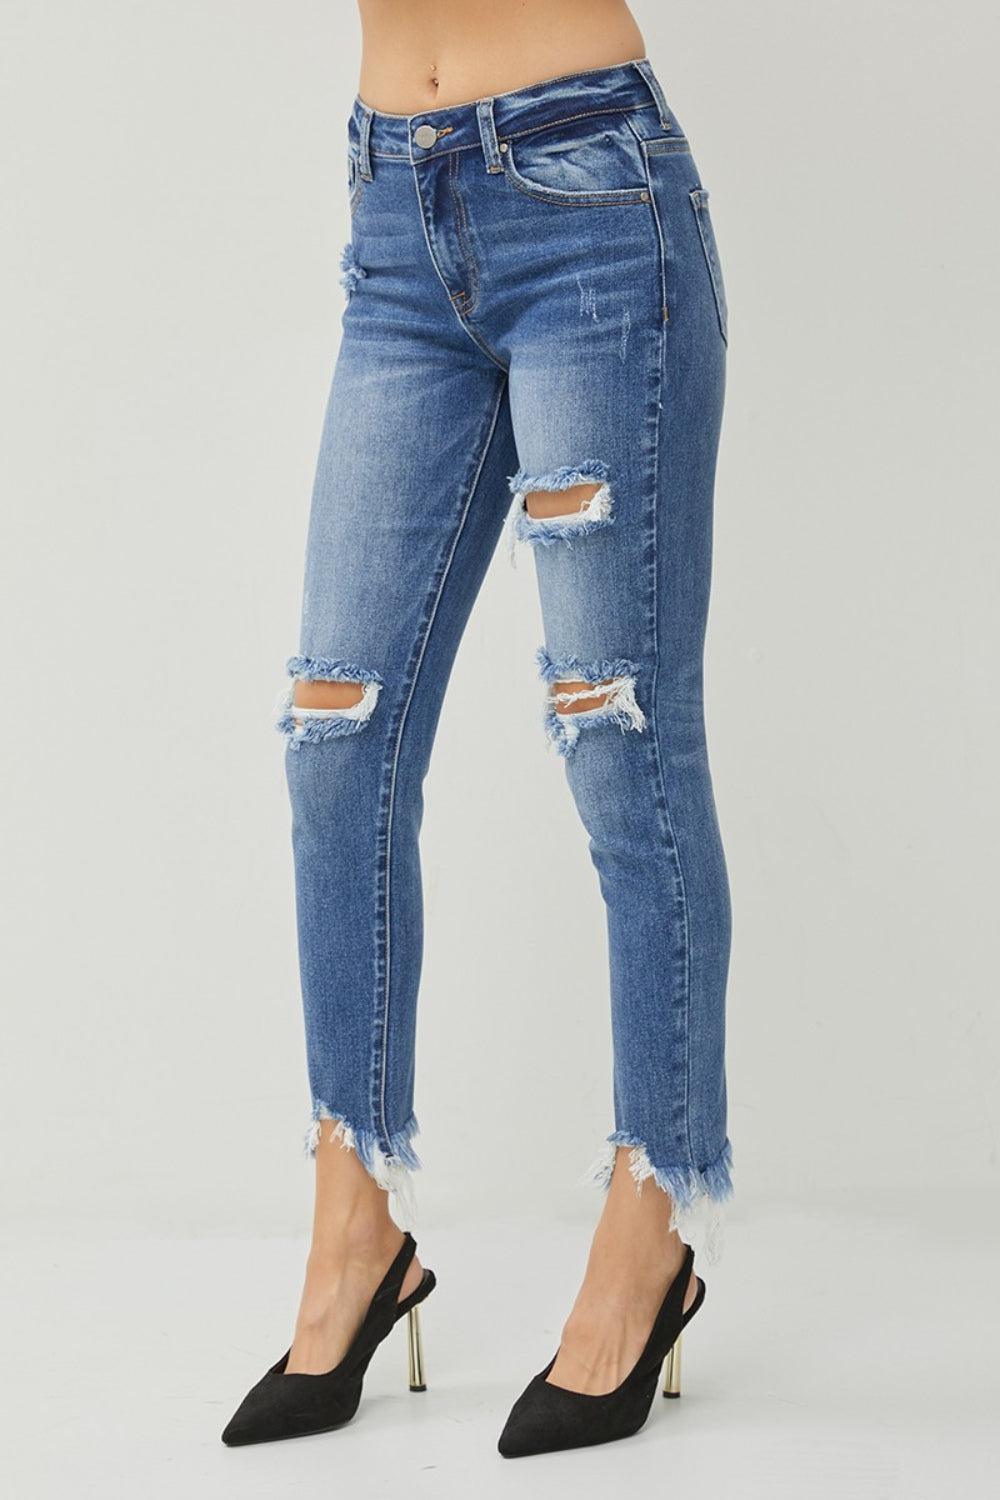 a woman in high heels is wearing a pair of ripped jeans